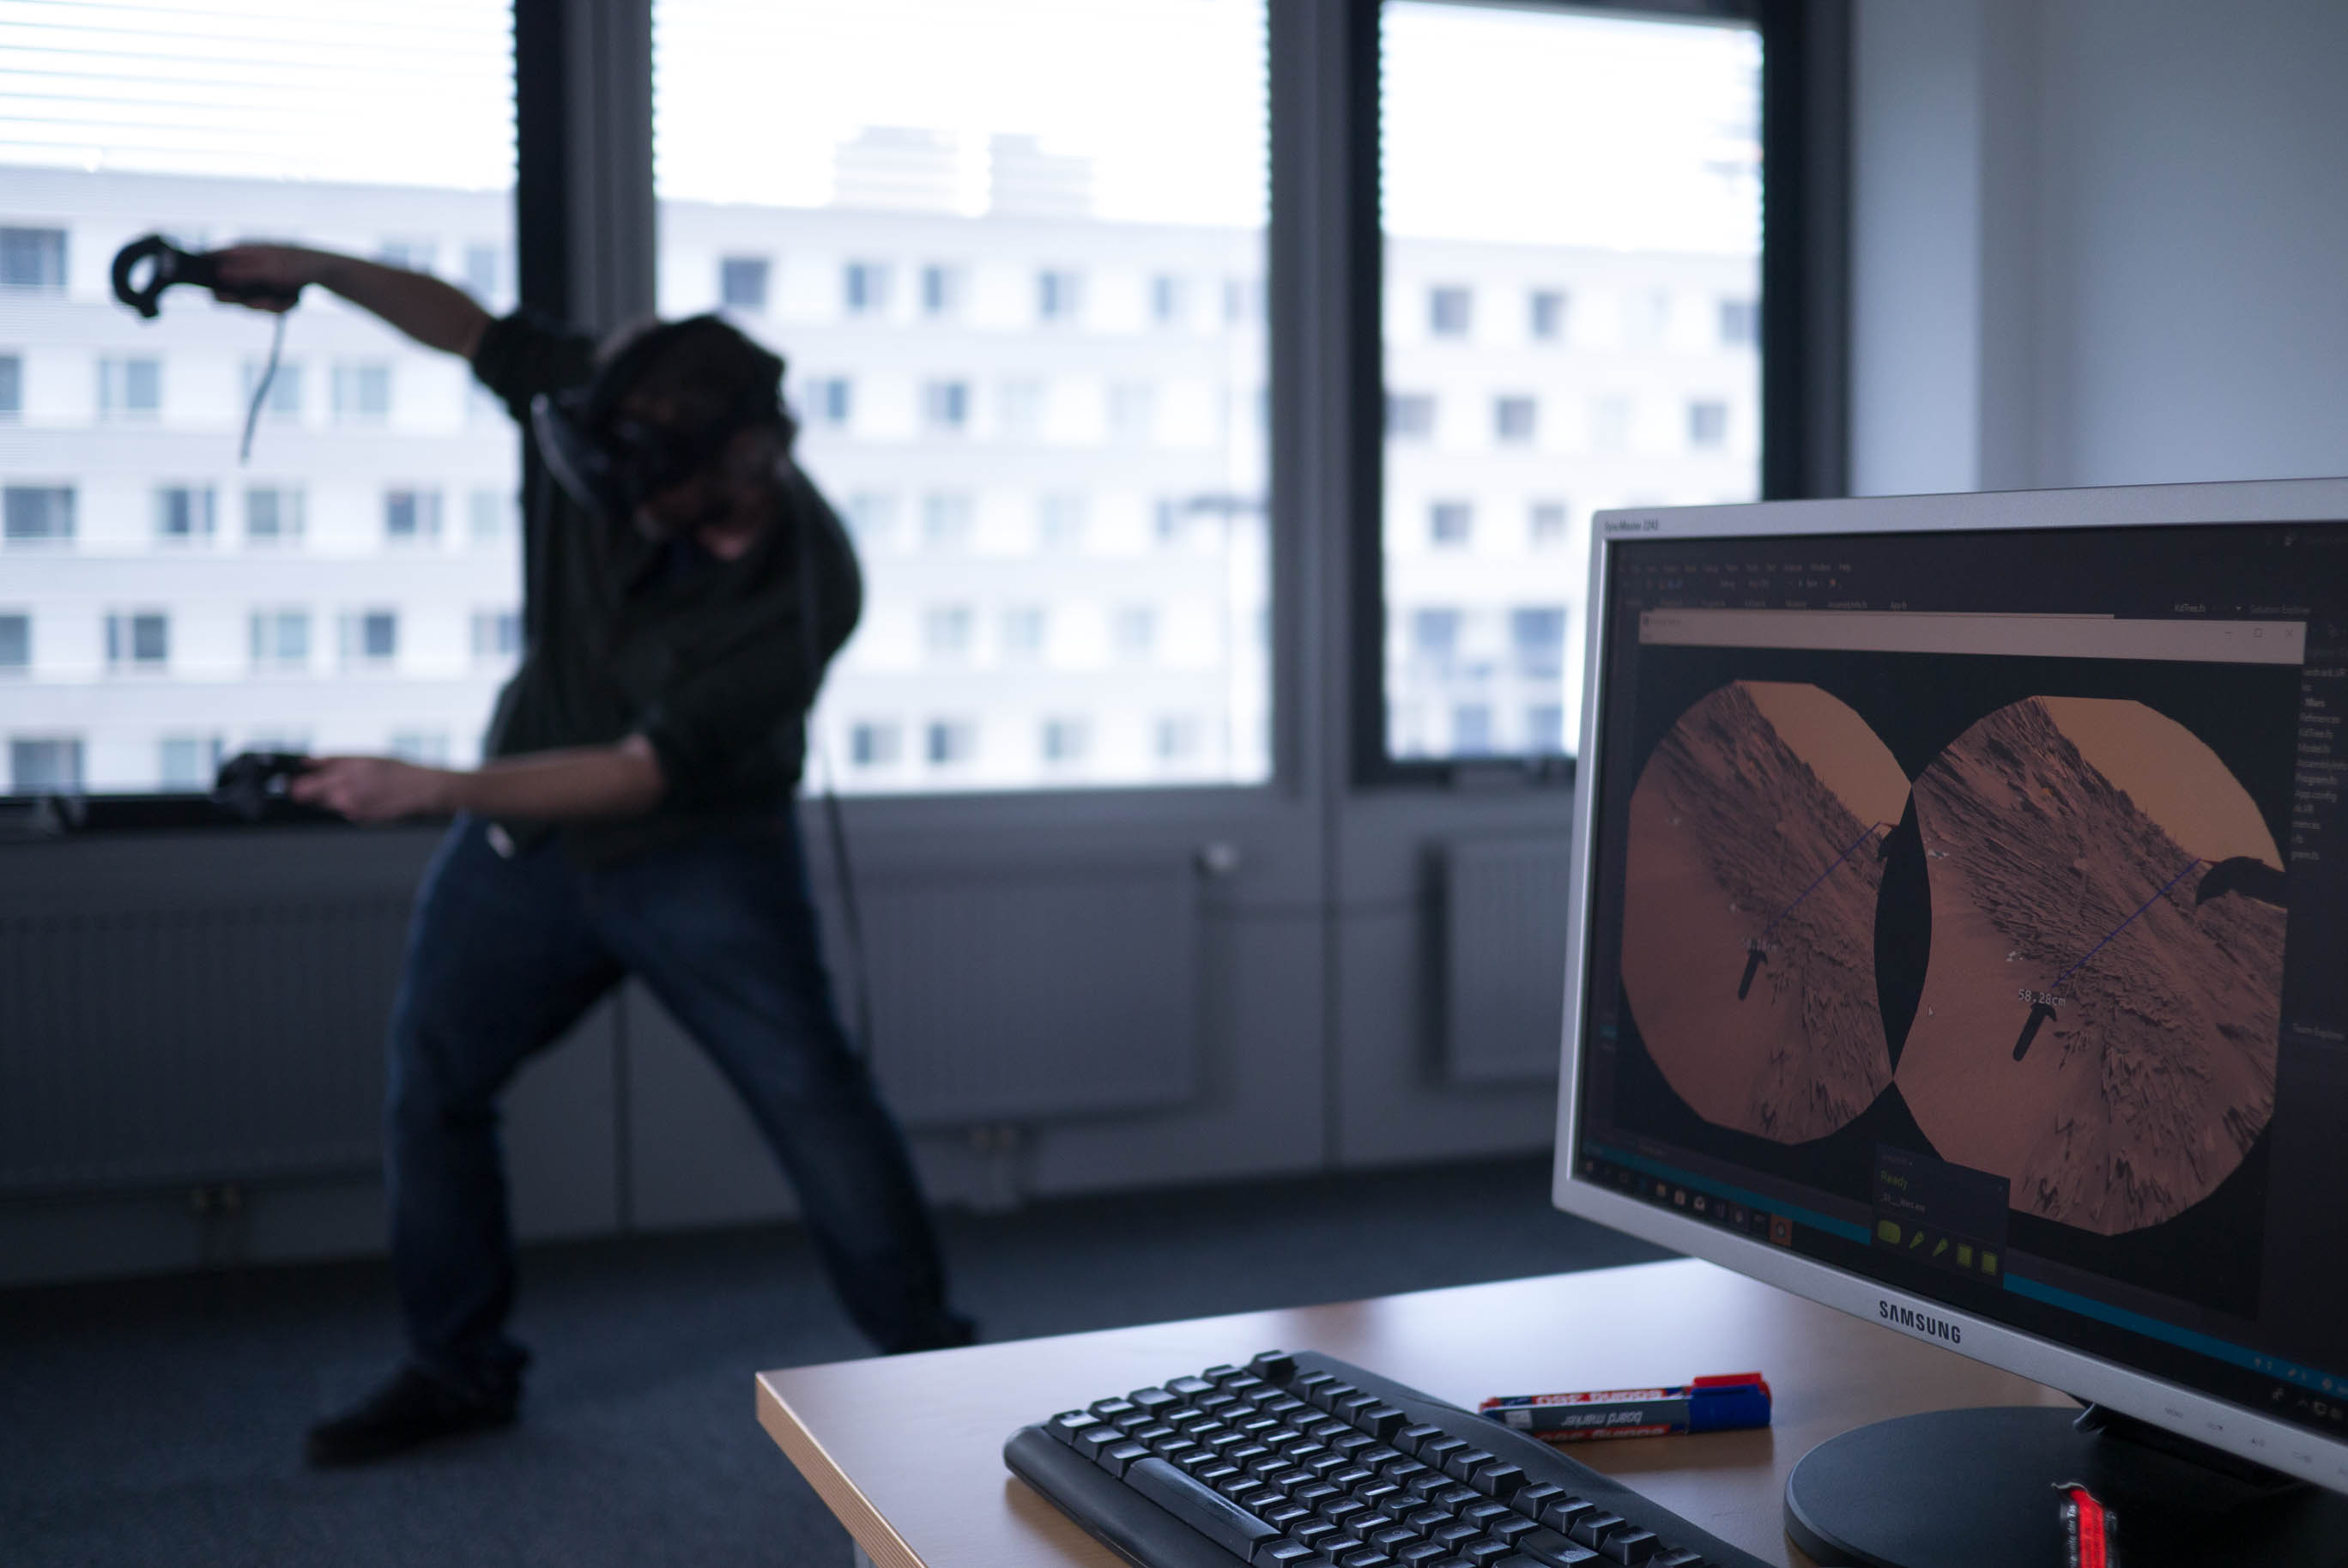 In the foreground is a desktop computer where 3D reconstructions of the Martian surface can be seen. In the background is a man with virtual reality gear moving around in this data in VR and exploring the Martian surface.